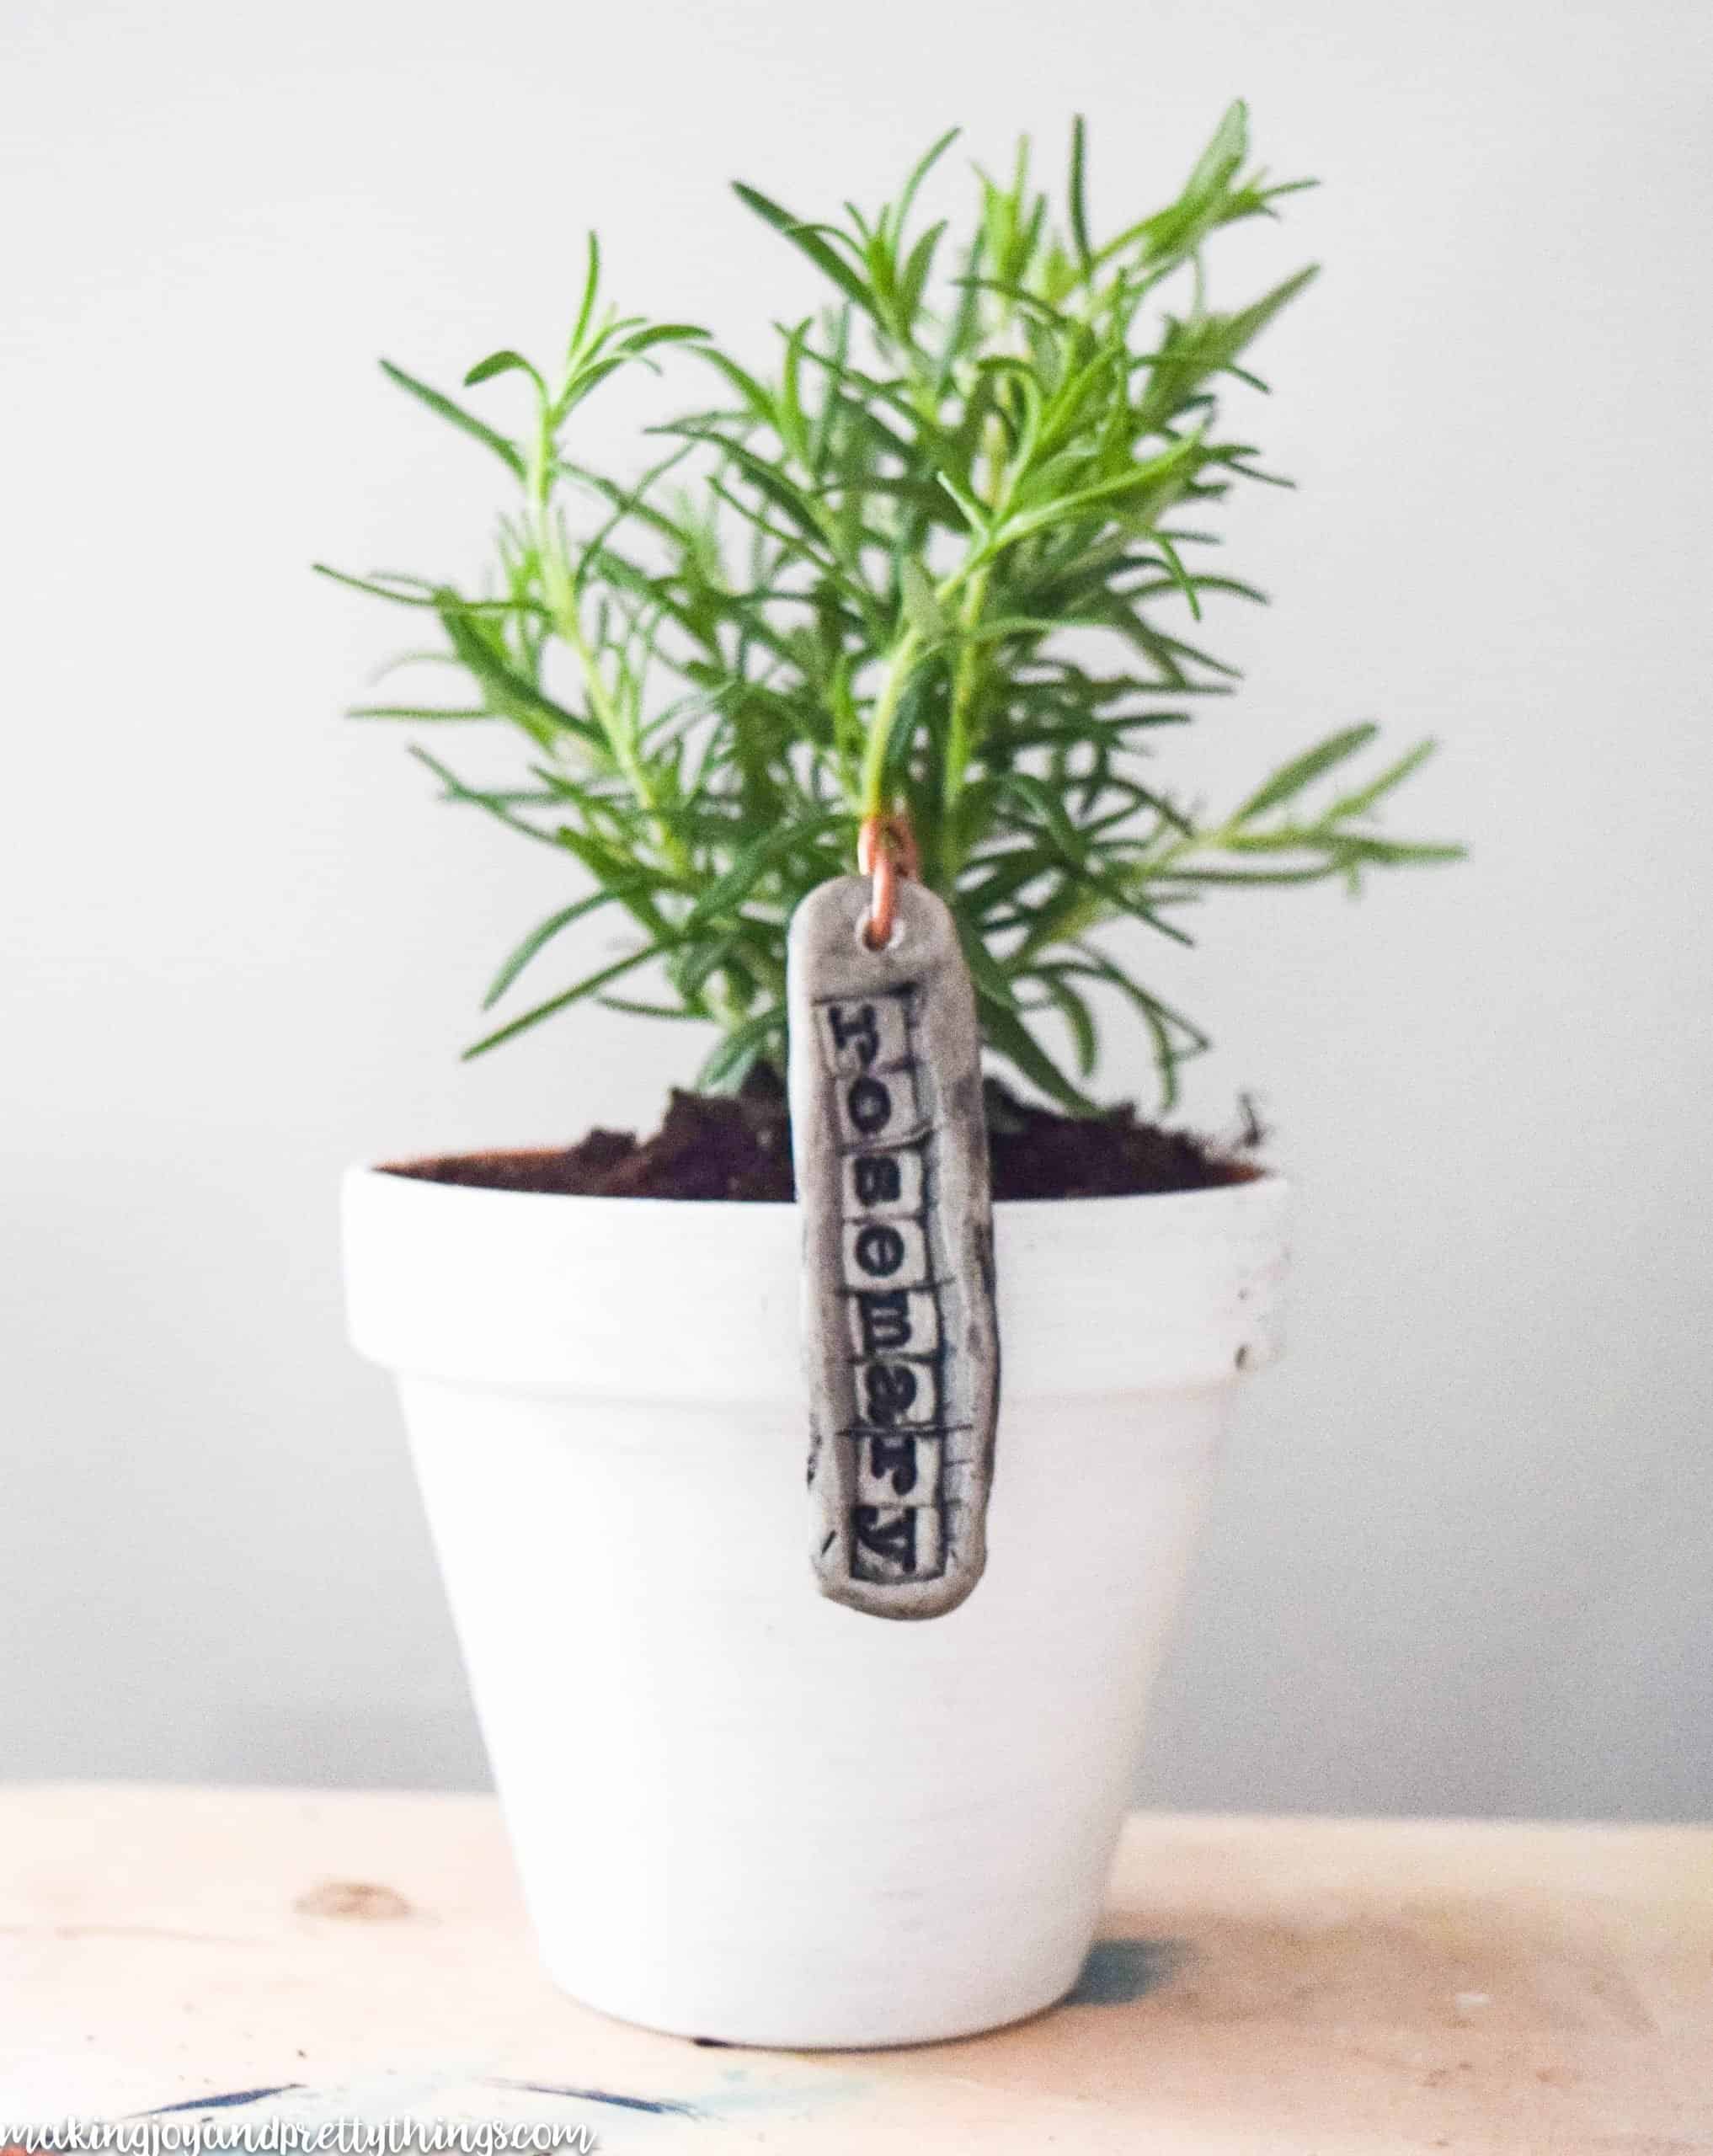 Distressed farmhouse pots are a great addition to these DIY plant labels and create an overall rustic look